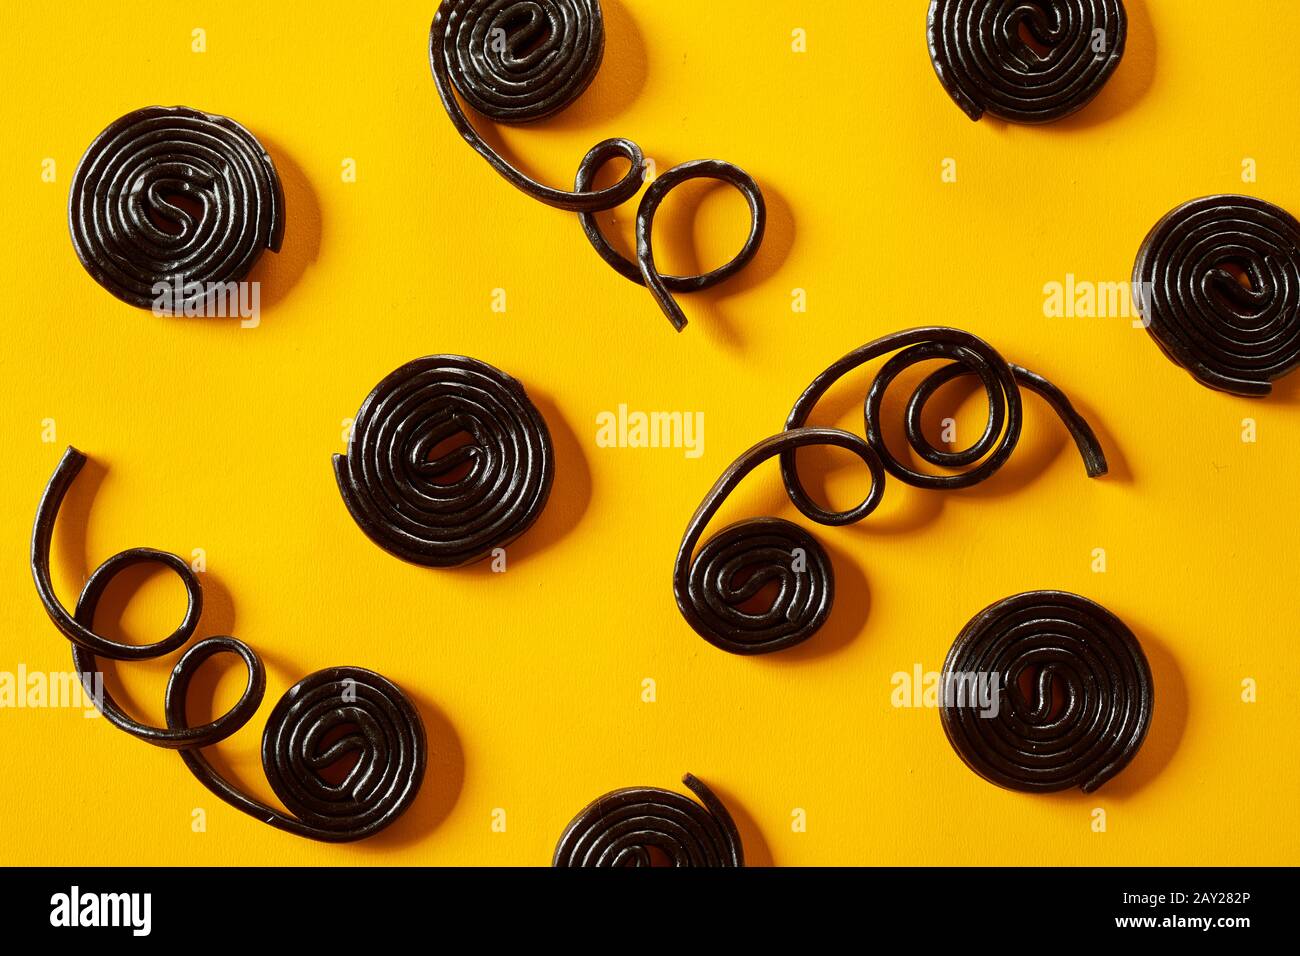 Coiled spirals of liquorice with trailing strands in a random pattern on a vivid yellow background in a full frame view Stock Photo